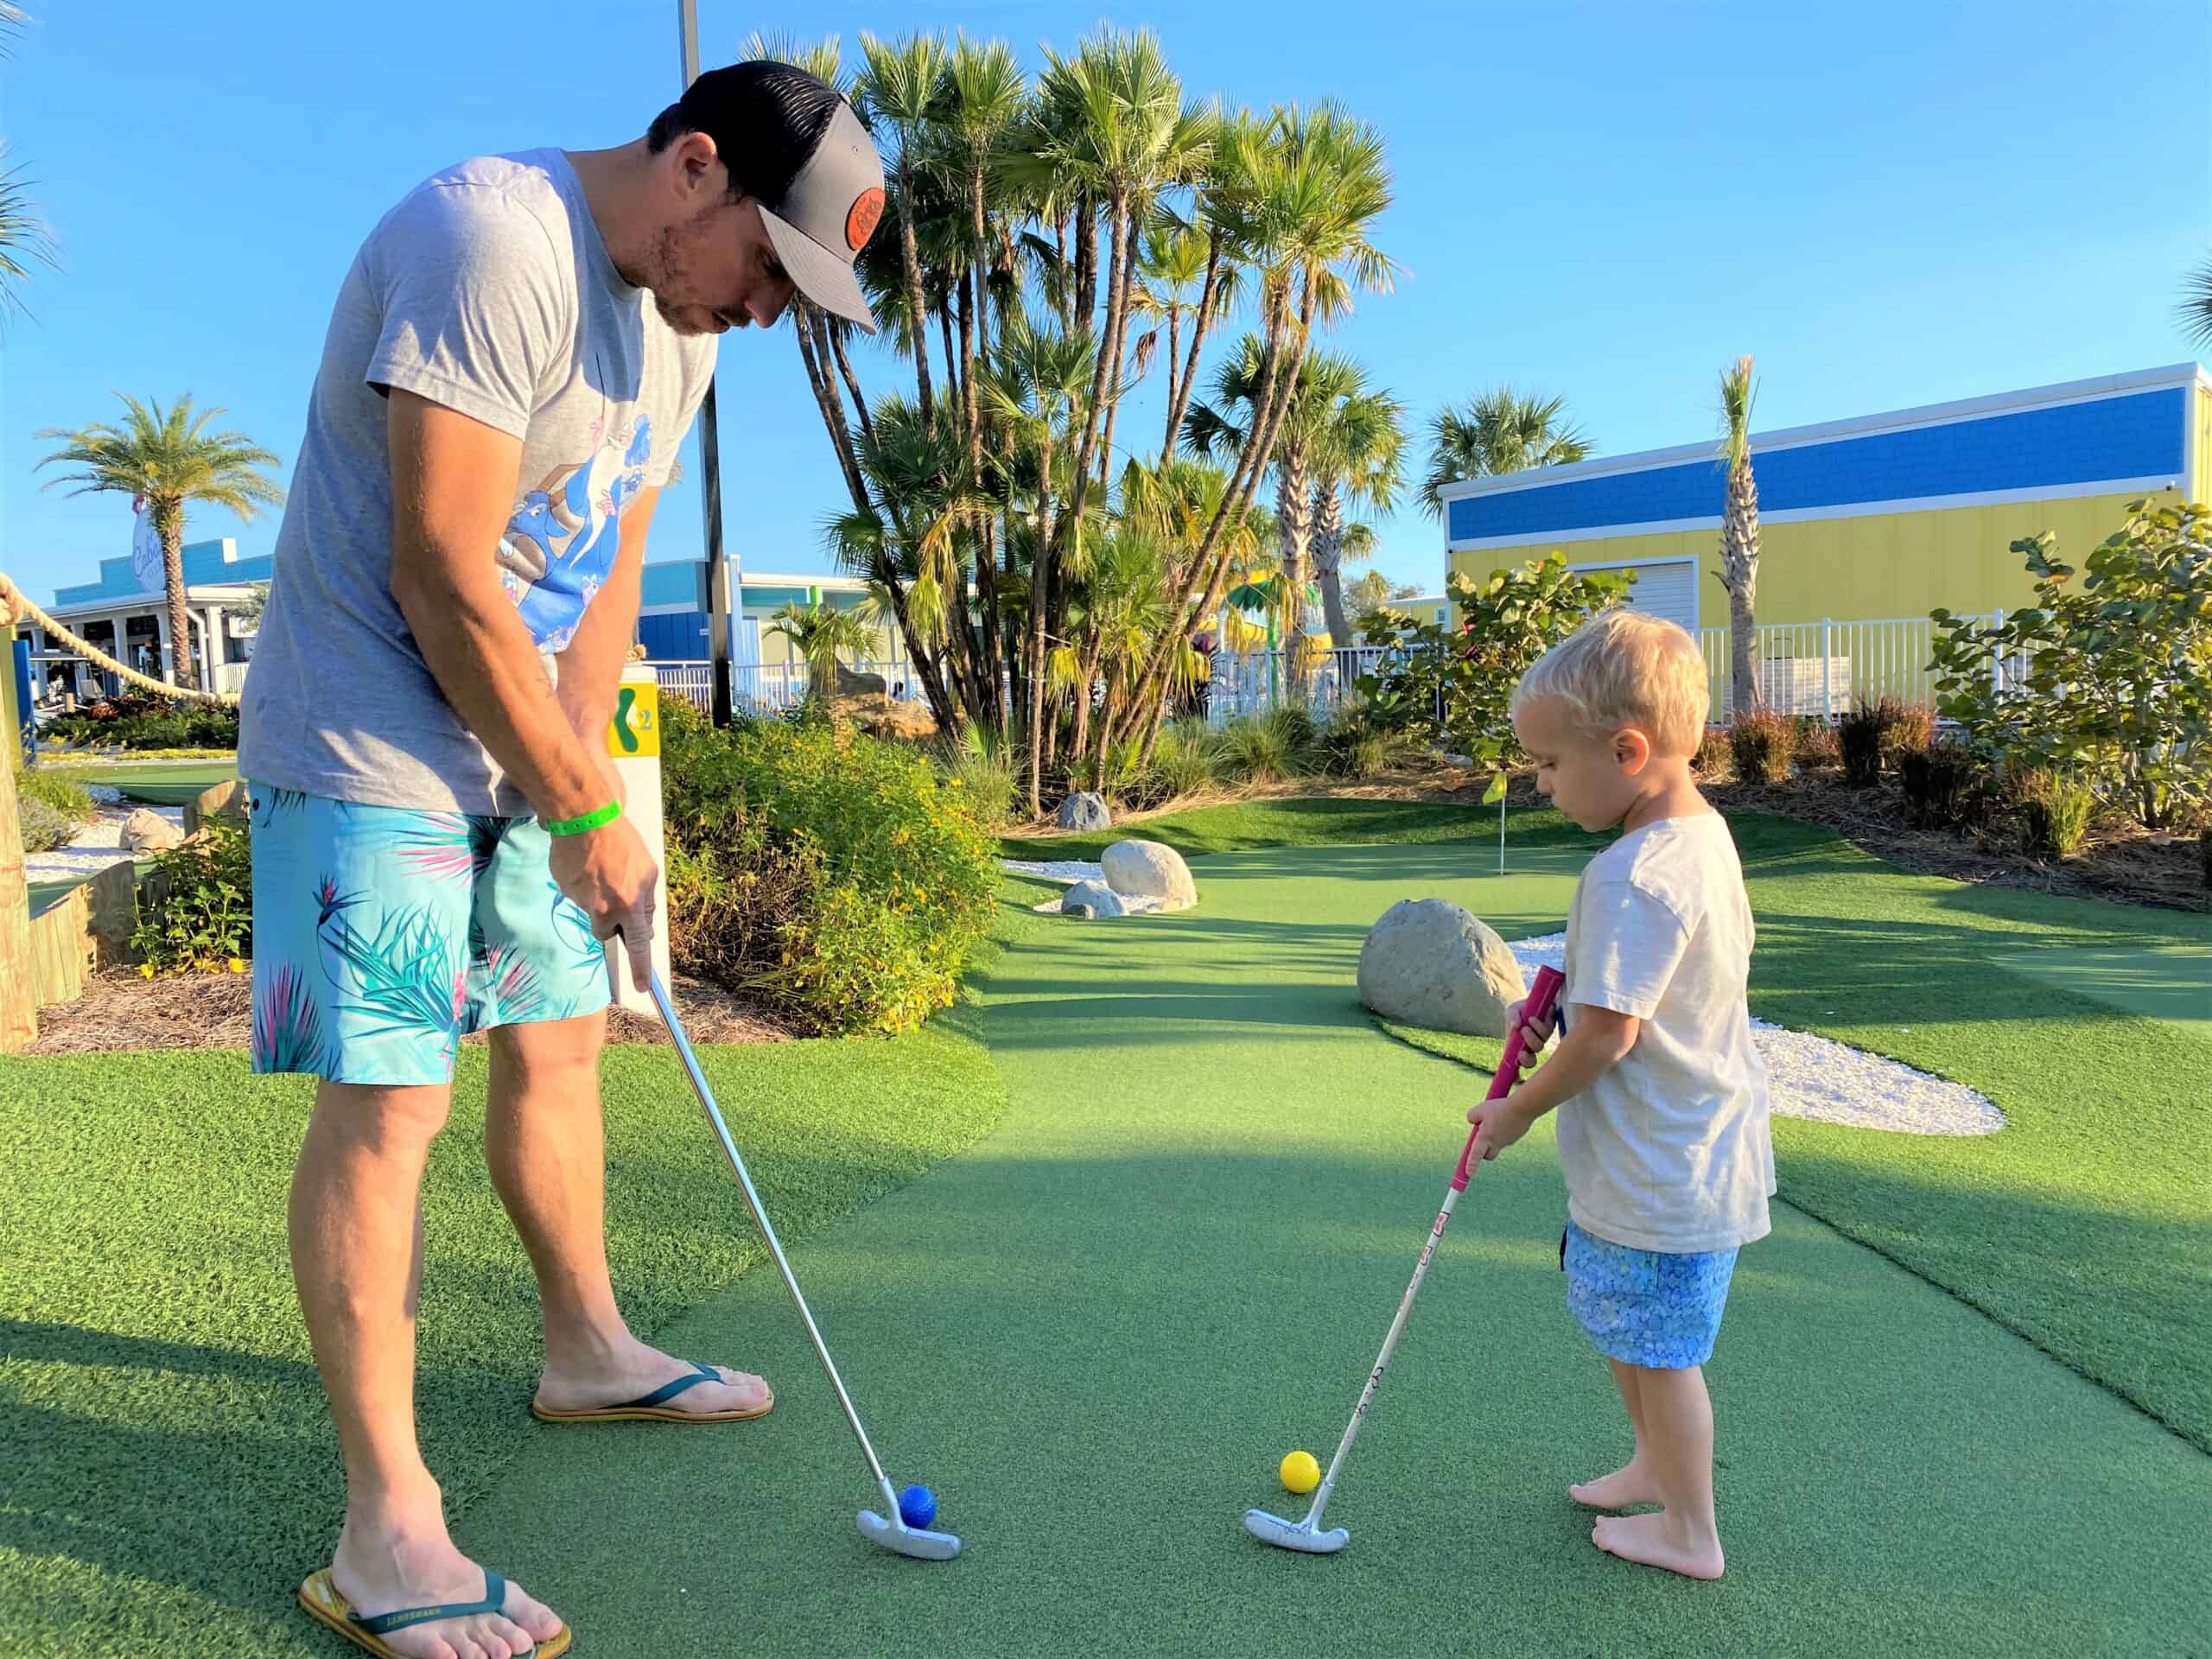 A father in gray t-shirt, baseball hat, and wearing tropical print shorts and flip flops holds a putting tee in his hands as his four year old son faces him and also has a putting tee in his hands, as they are both about to put a golf ball down the green at Putting Course at Cabana Club Resort